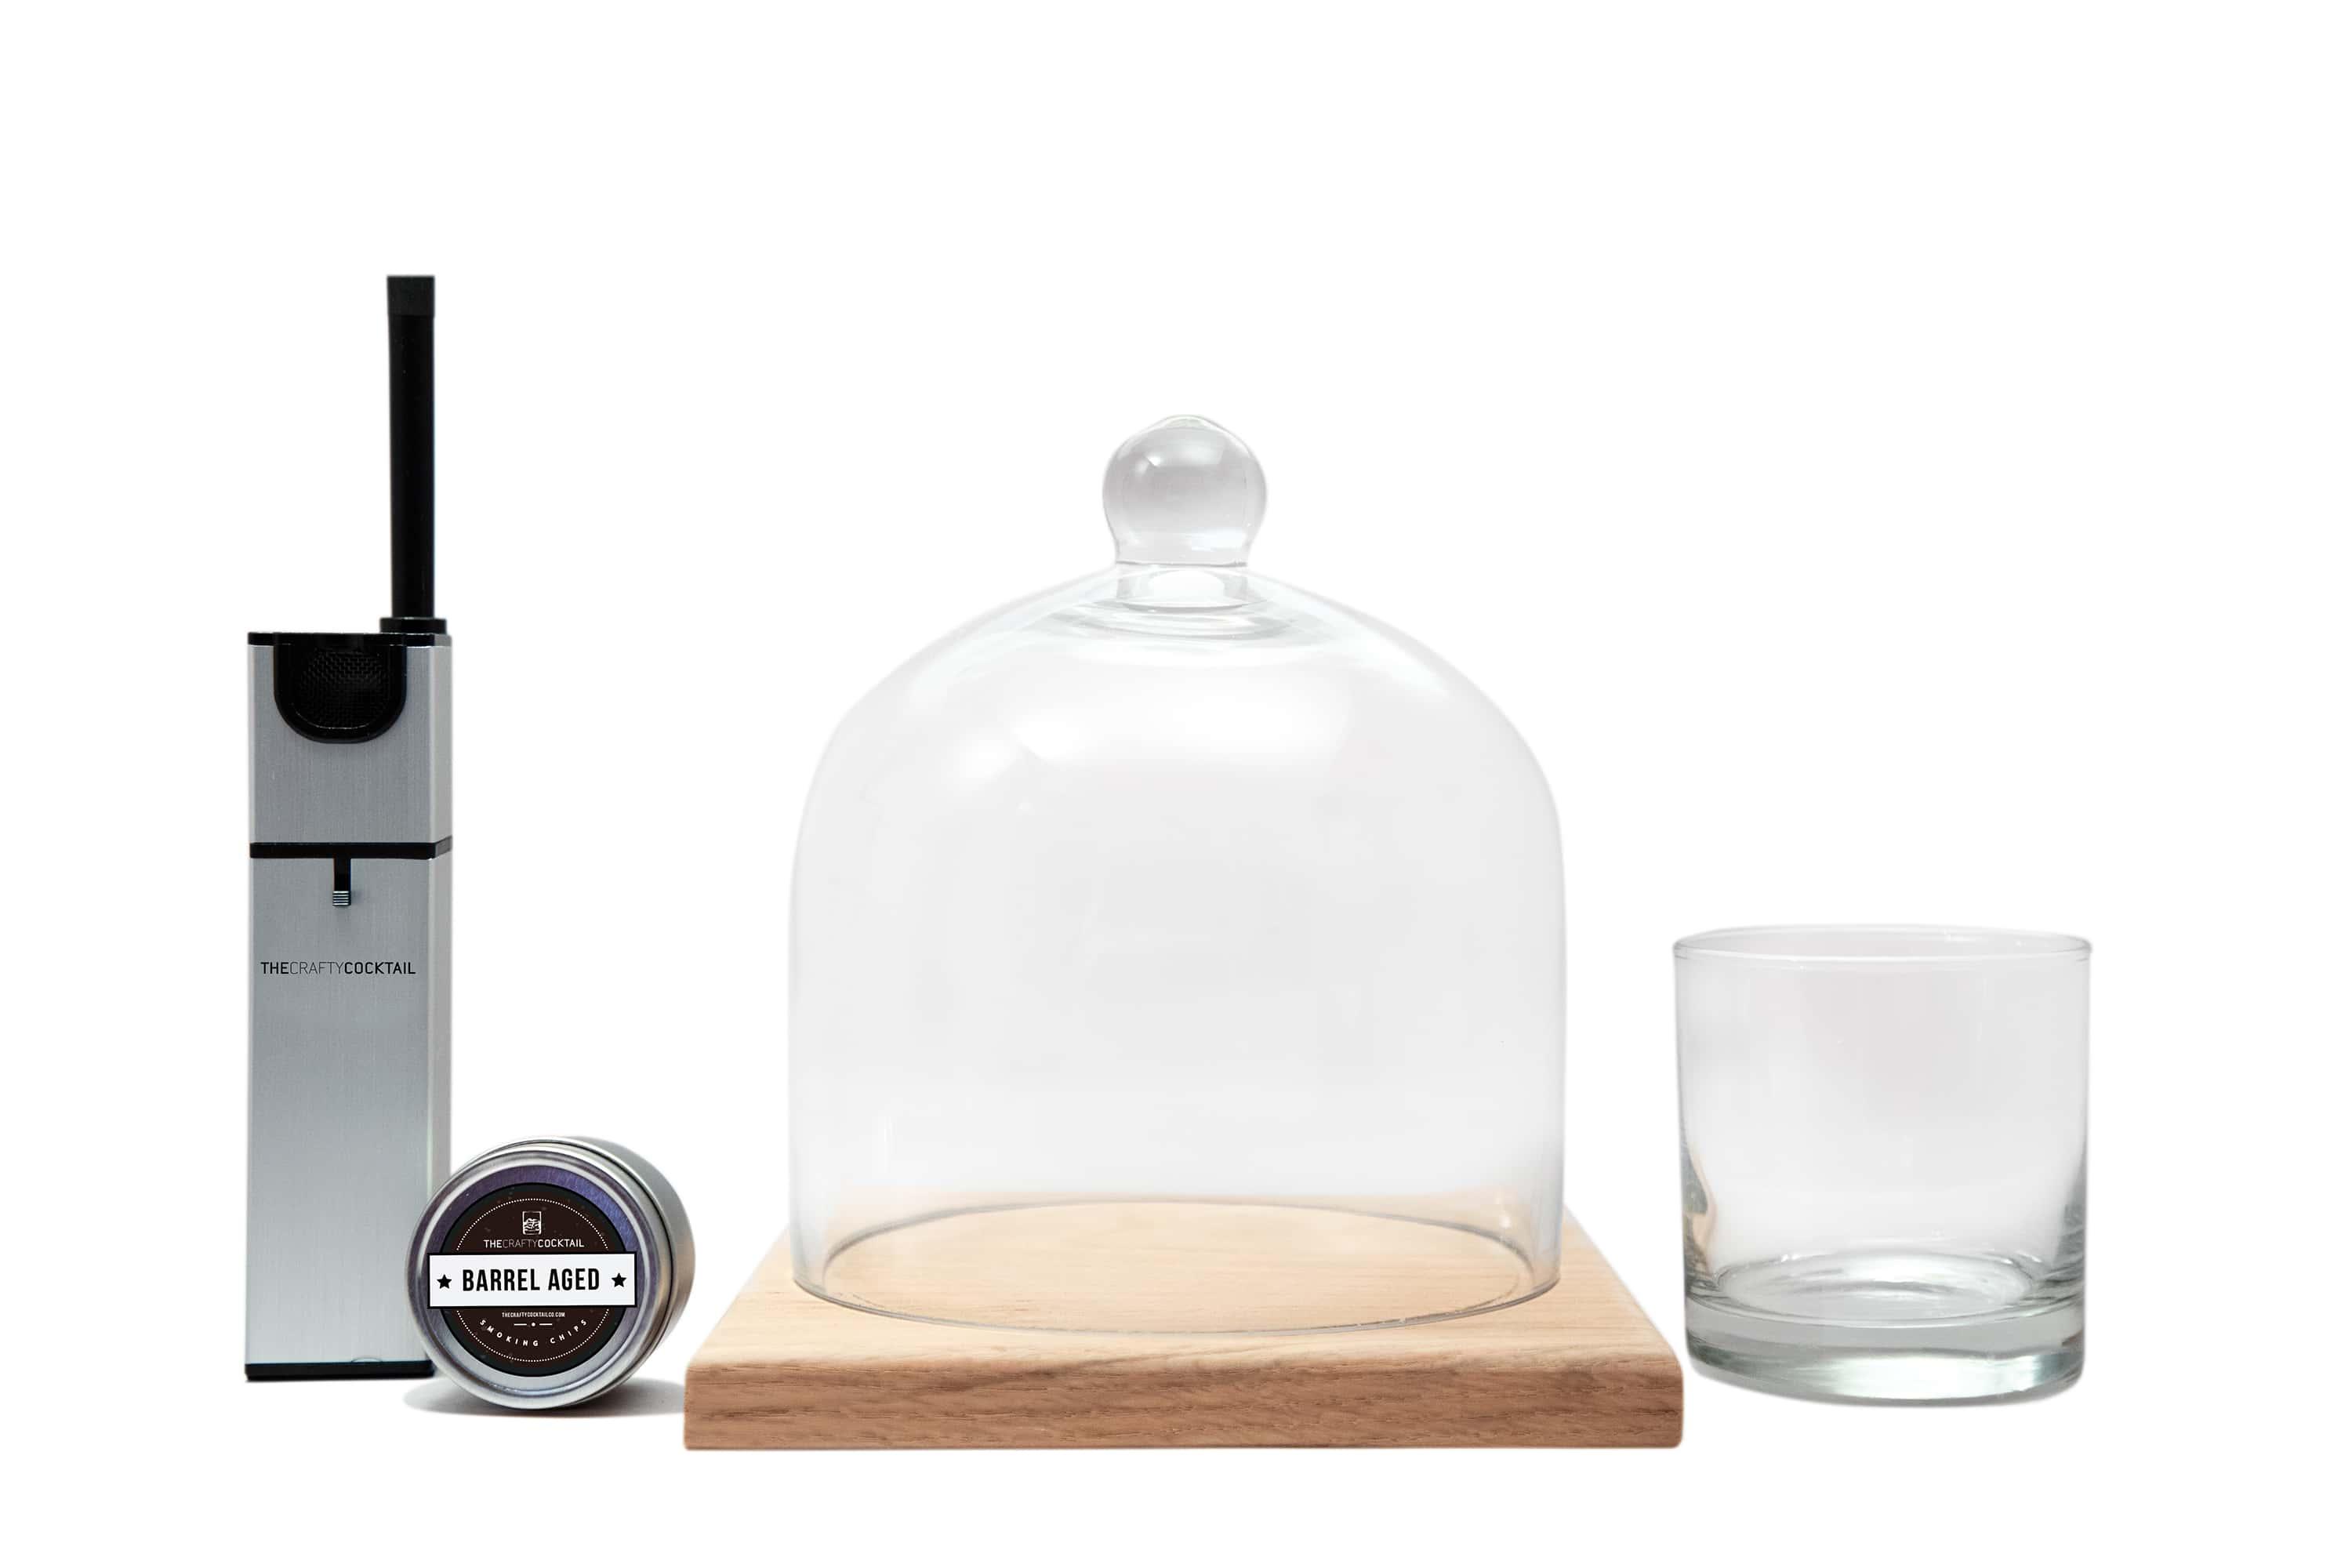 Slate Dome Cocktail Smoking Kit – The Crafty Cocktail